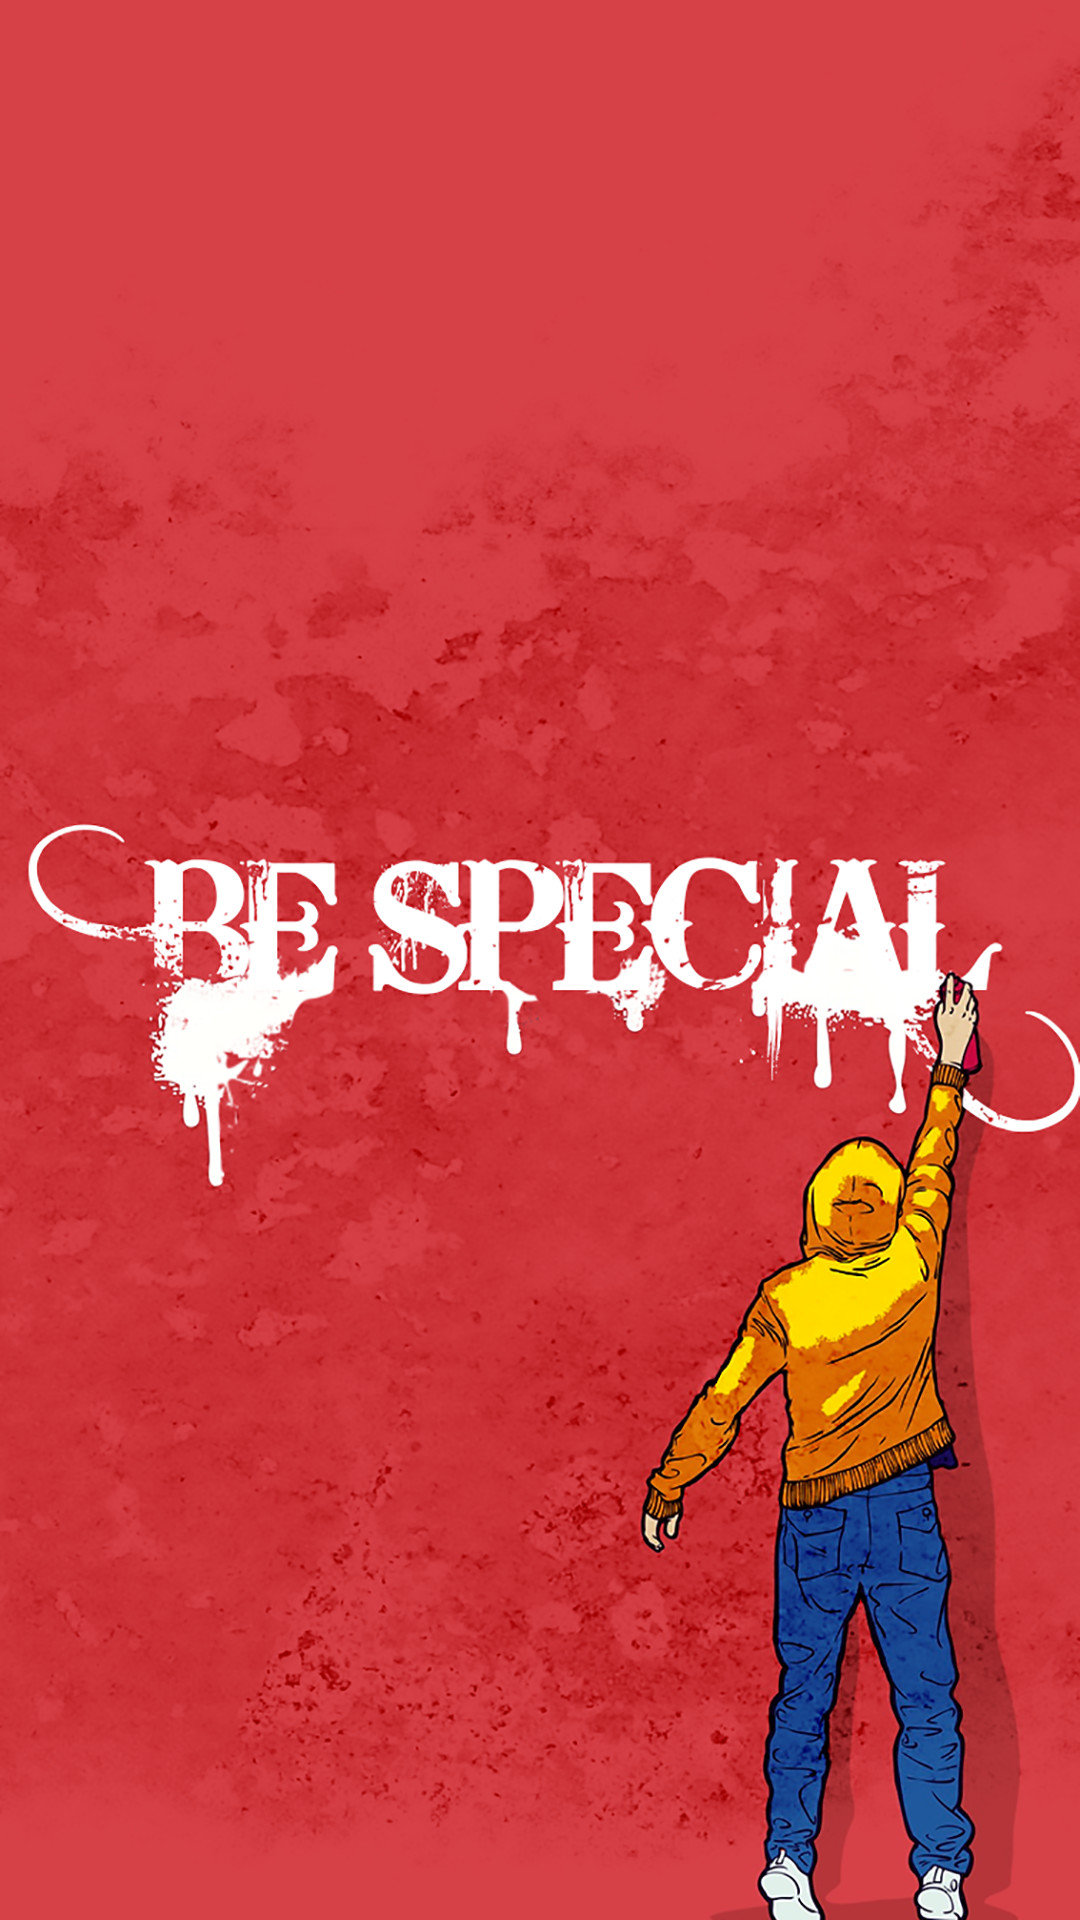 1080x1920 Art Creative Graffiti Walls Quotes Red Pink Â· Iphone 6 ...